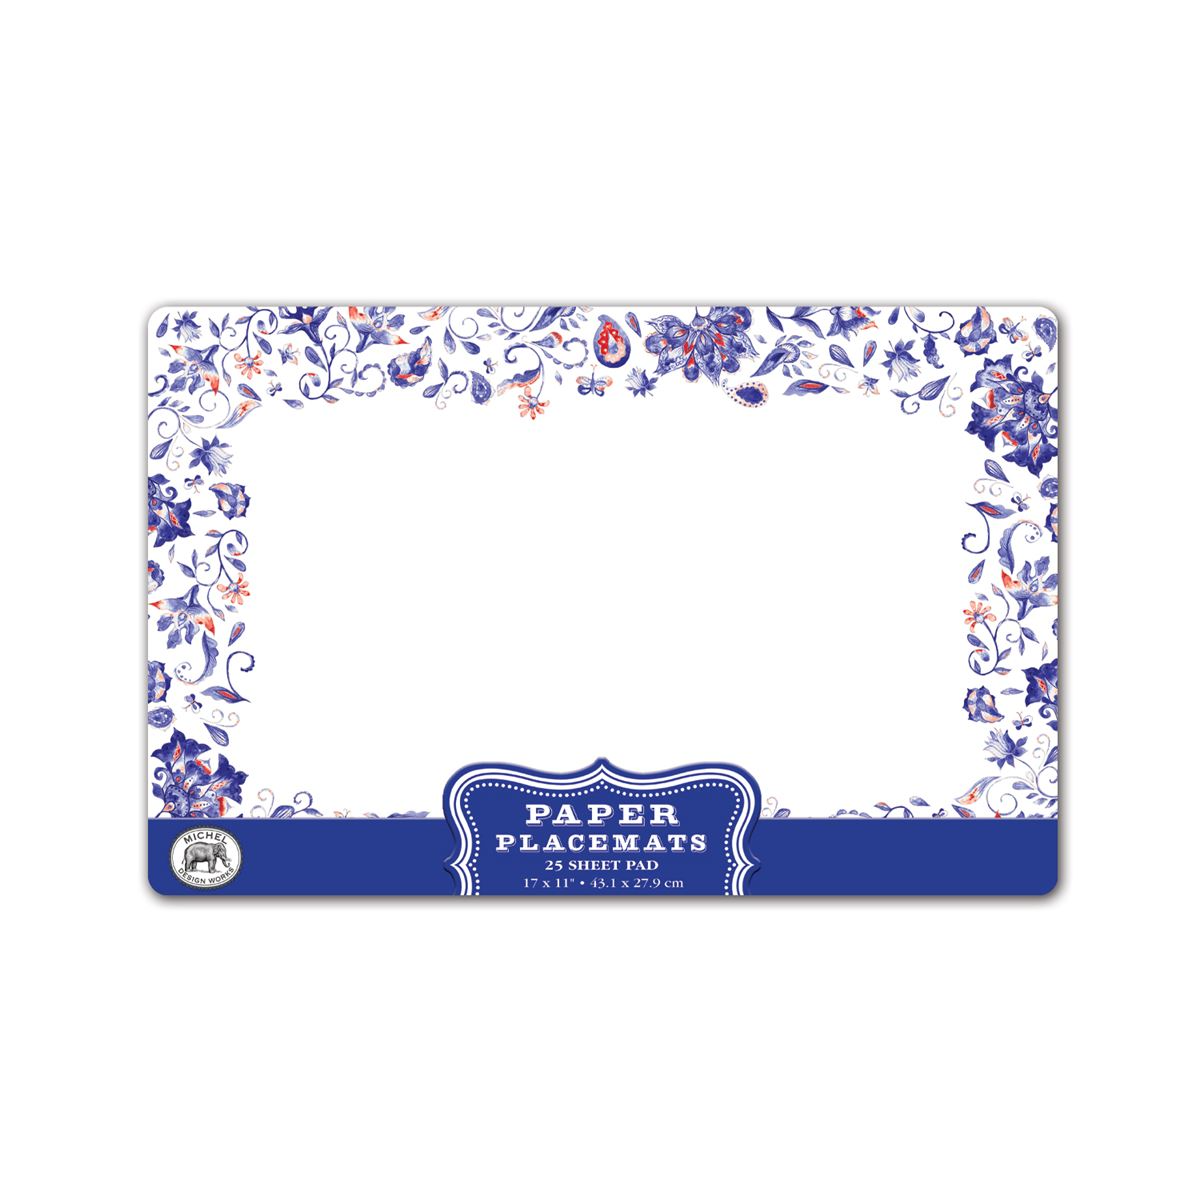 Michel Design Works Paisley & Plaid Paper Placemats (pack of 25)